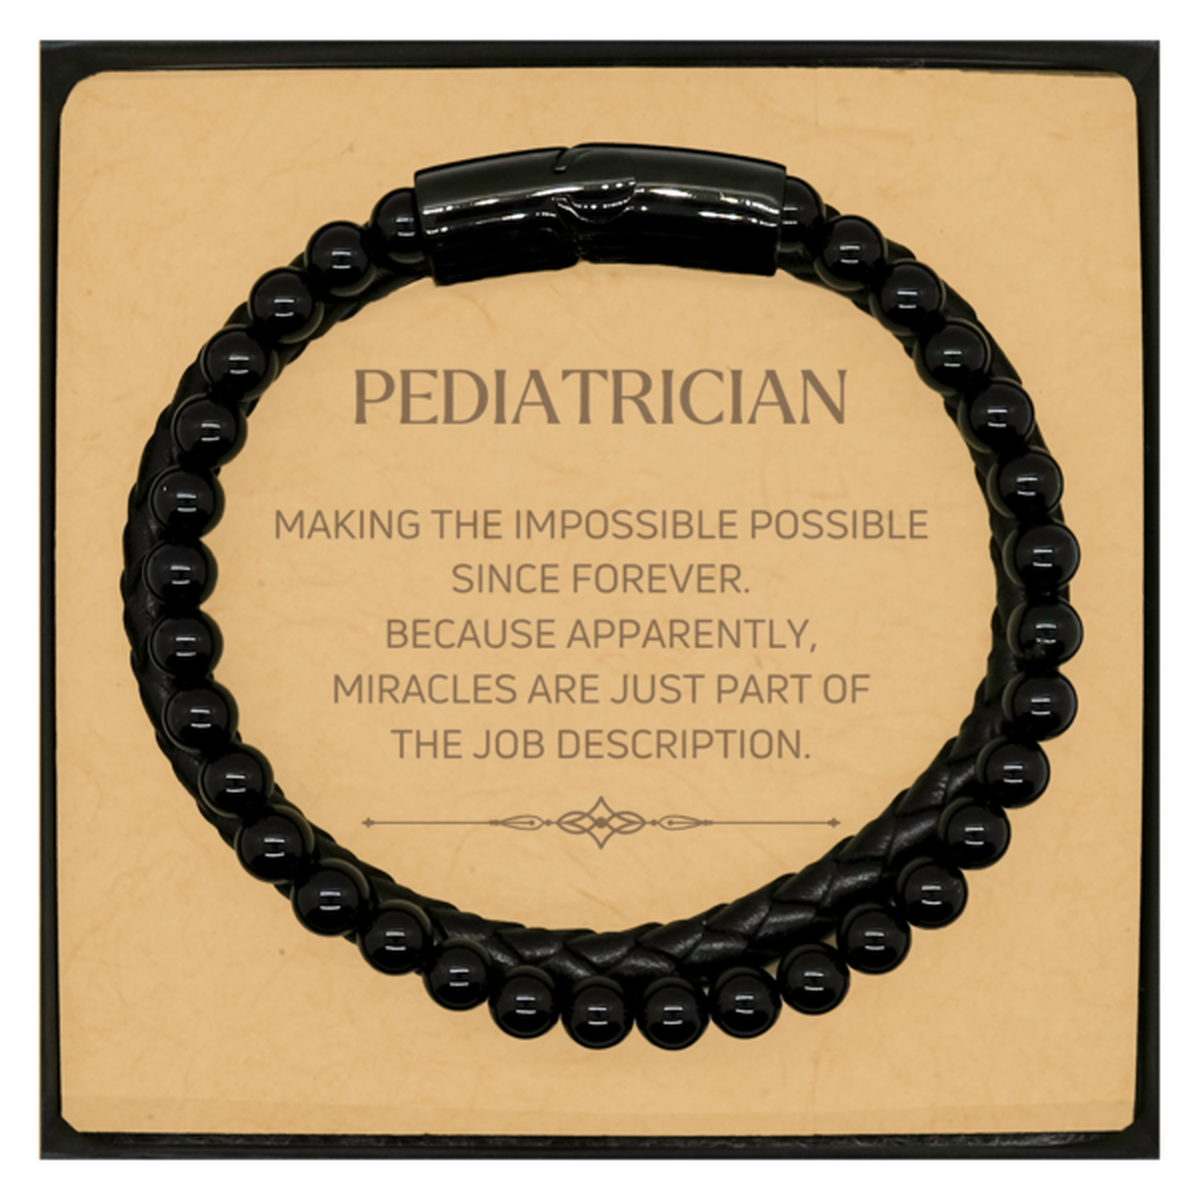 Funny Pediatrician Gifts, Miracles are just part of the job description, Inspirational Birthday Christmas Stone Leather Bracelets For Pediatrician, Men, Women, Coworkers, Friends, Boss